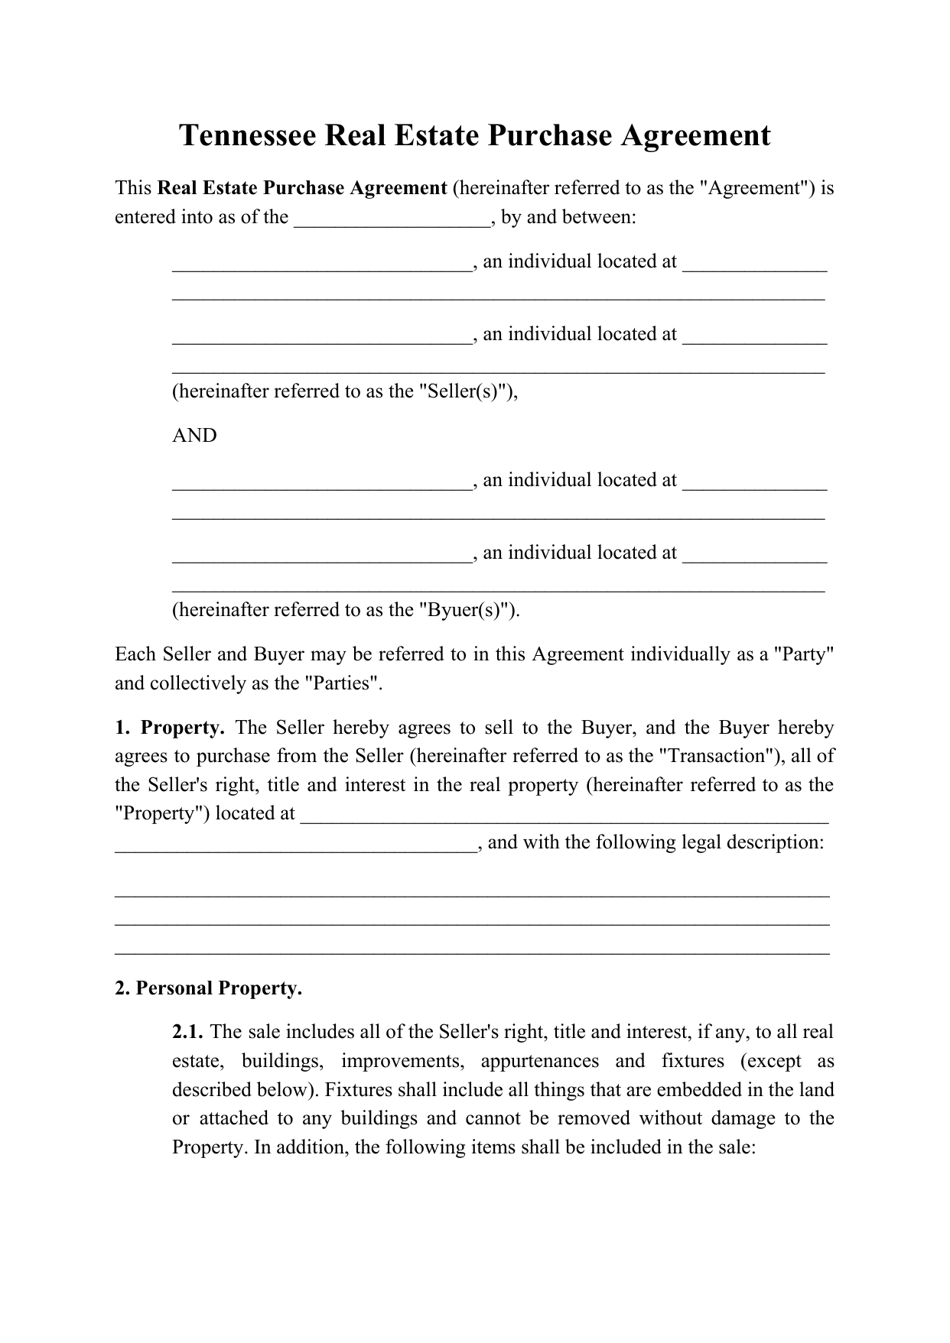 tennessee-real-estate-purchase-agreement-template-fill-out-sign